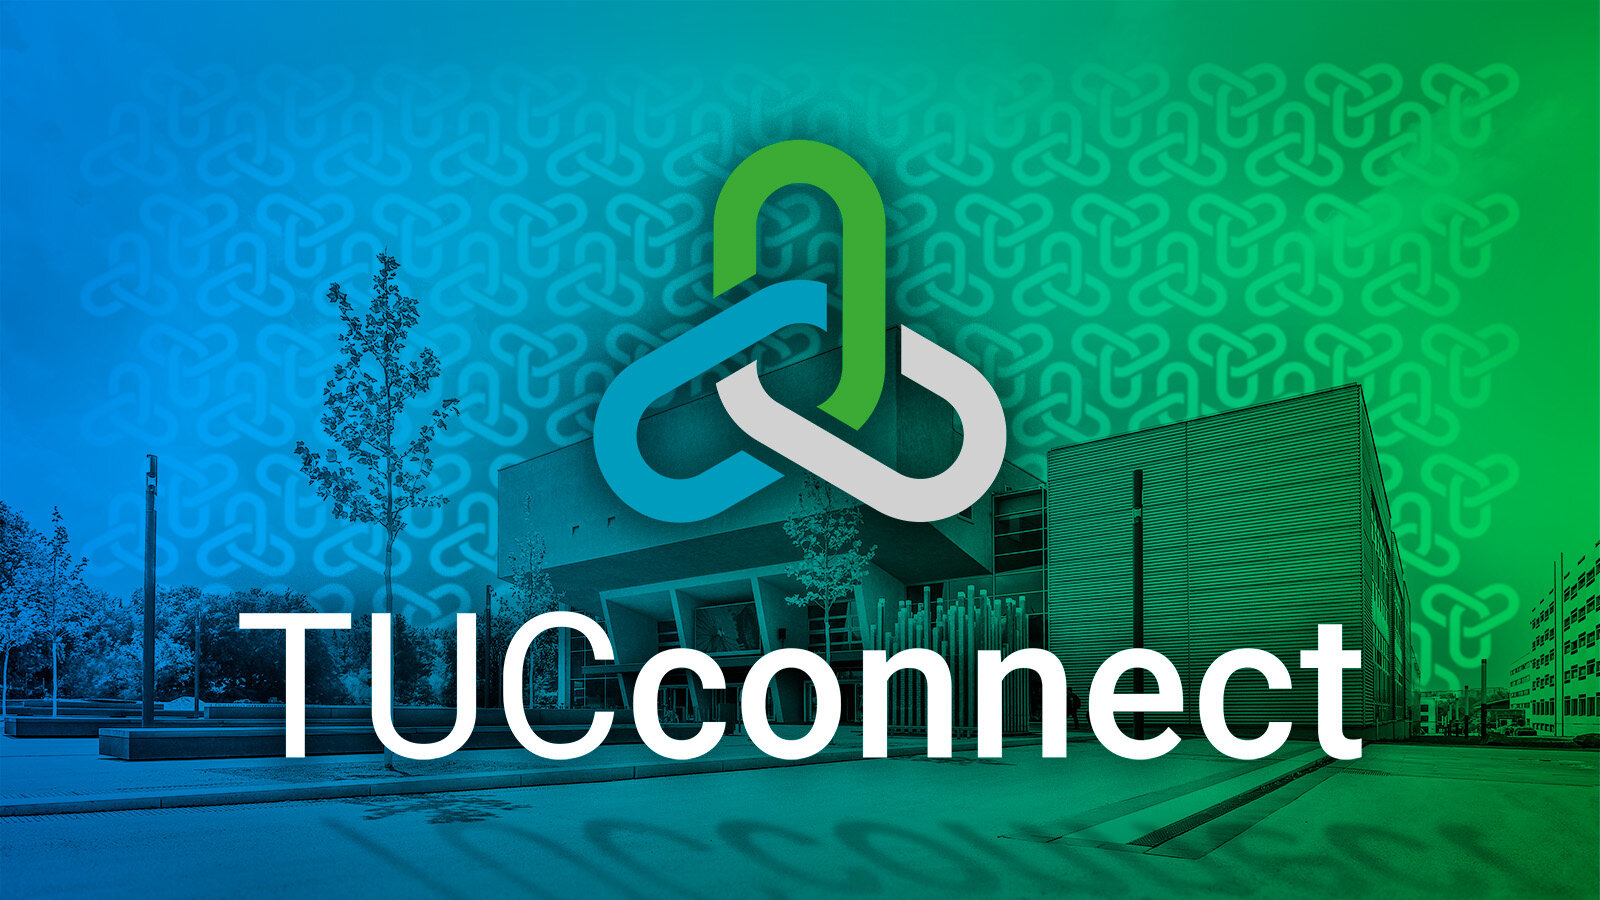 Career fair “TUCconnect Spring” goes into the next round |  TUCcurrent